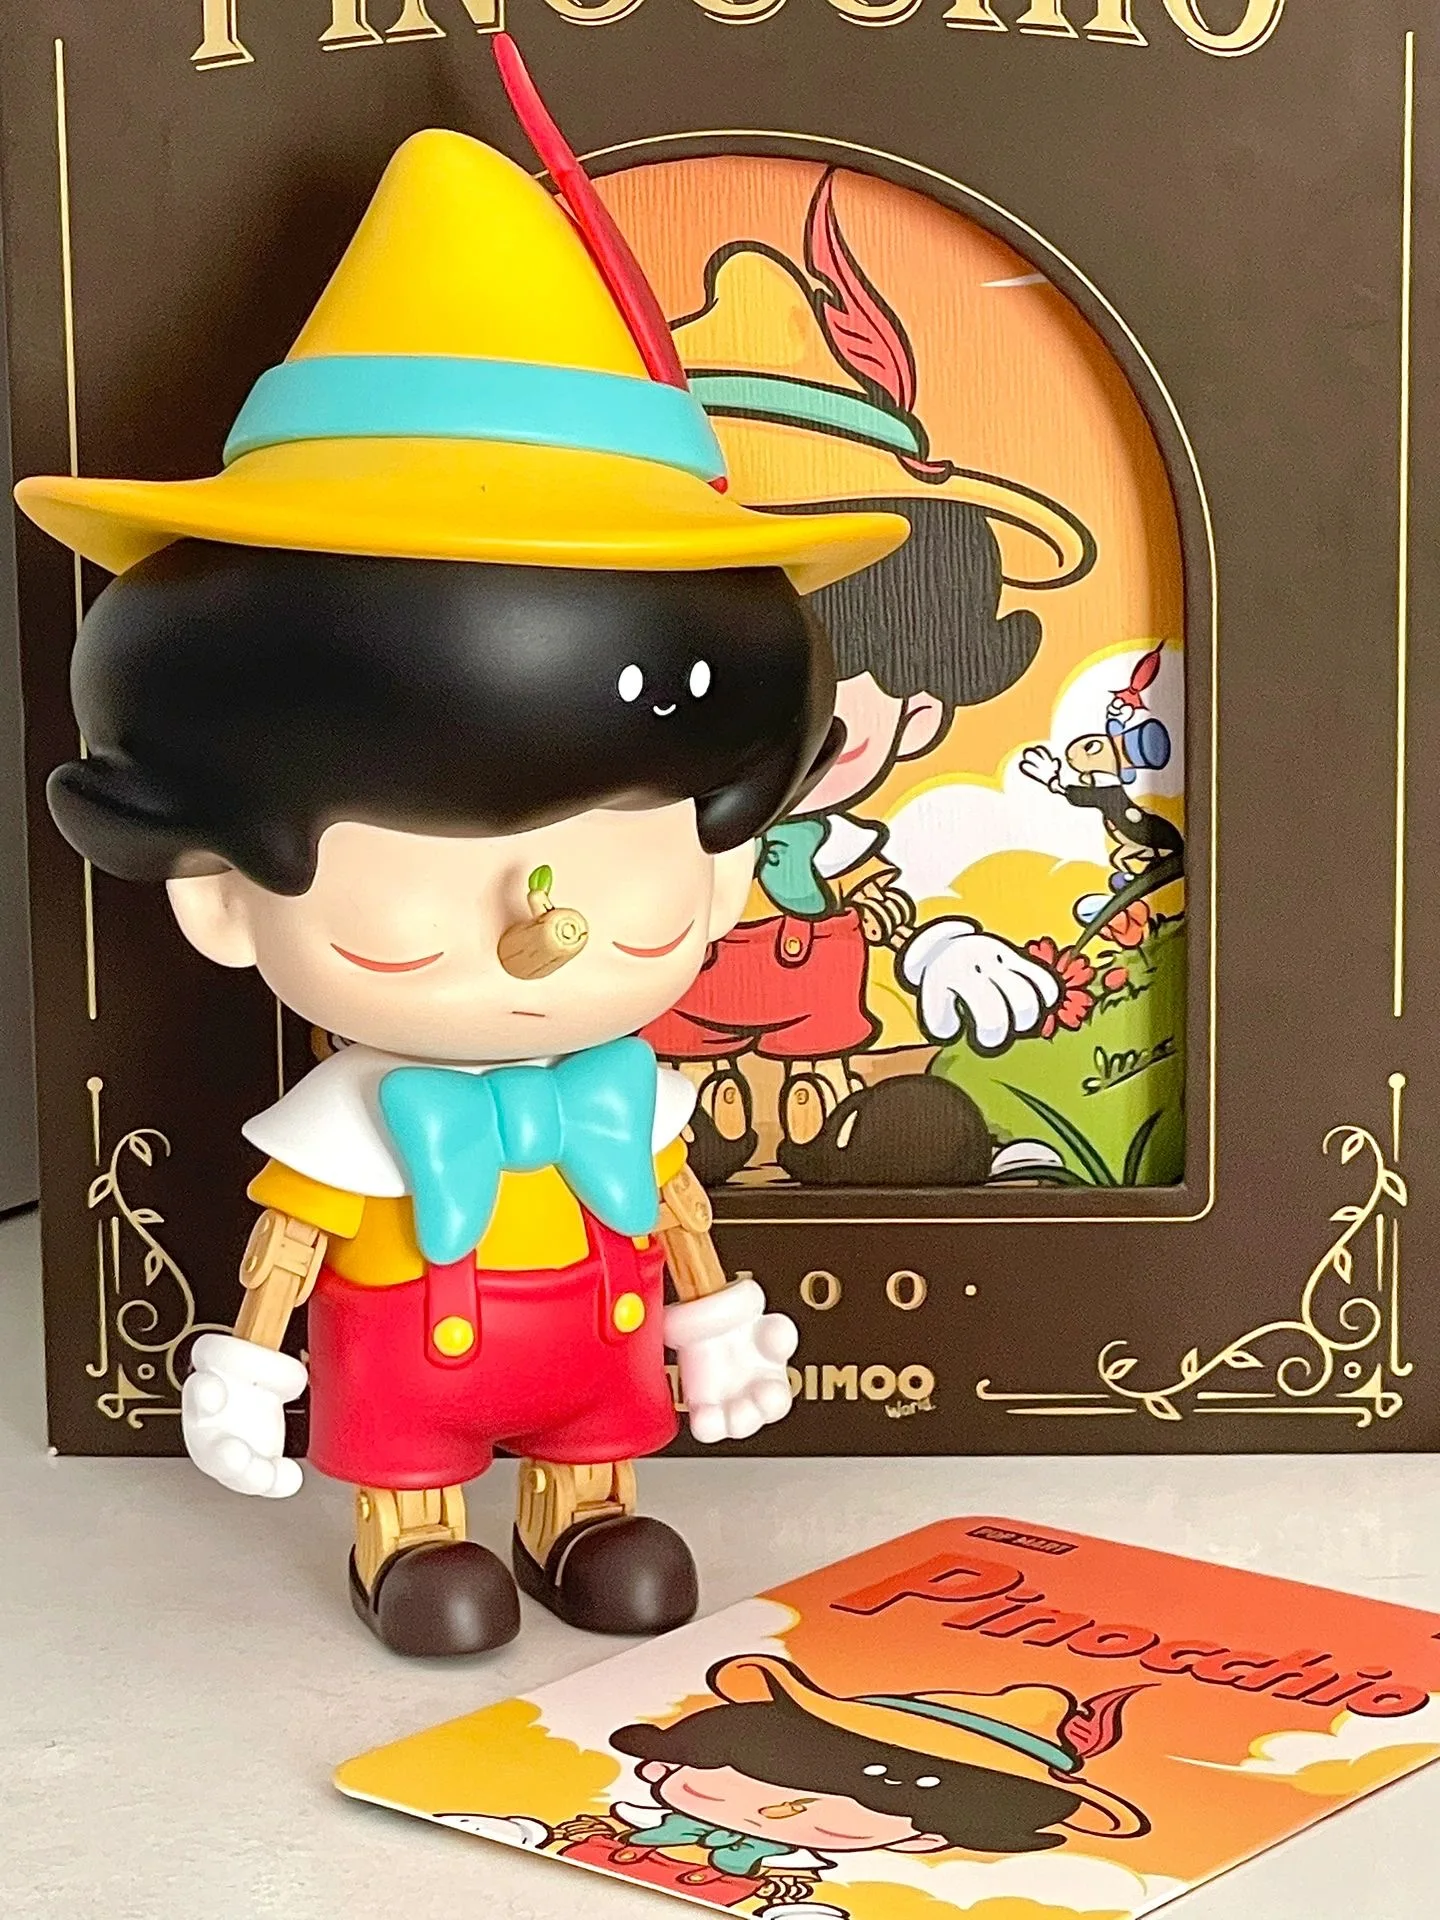 

POP MART DIMOO Collaboration Long Nose Fairy Tale Figure DIMOO World Extra Size Limited Edition Collection Toy Decoration